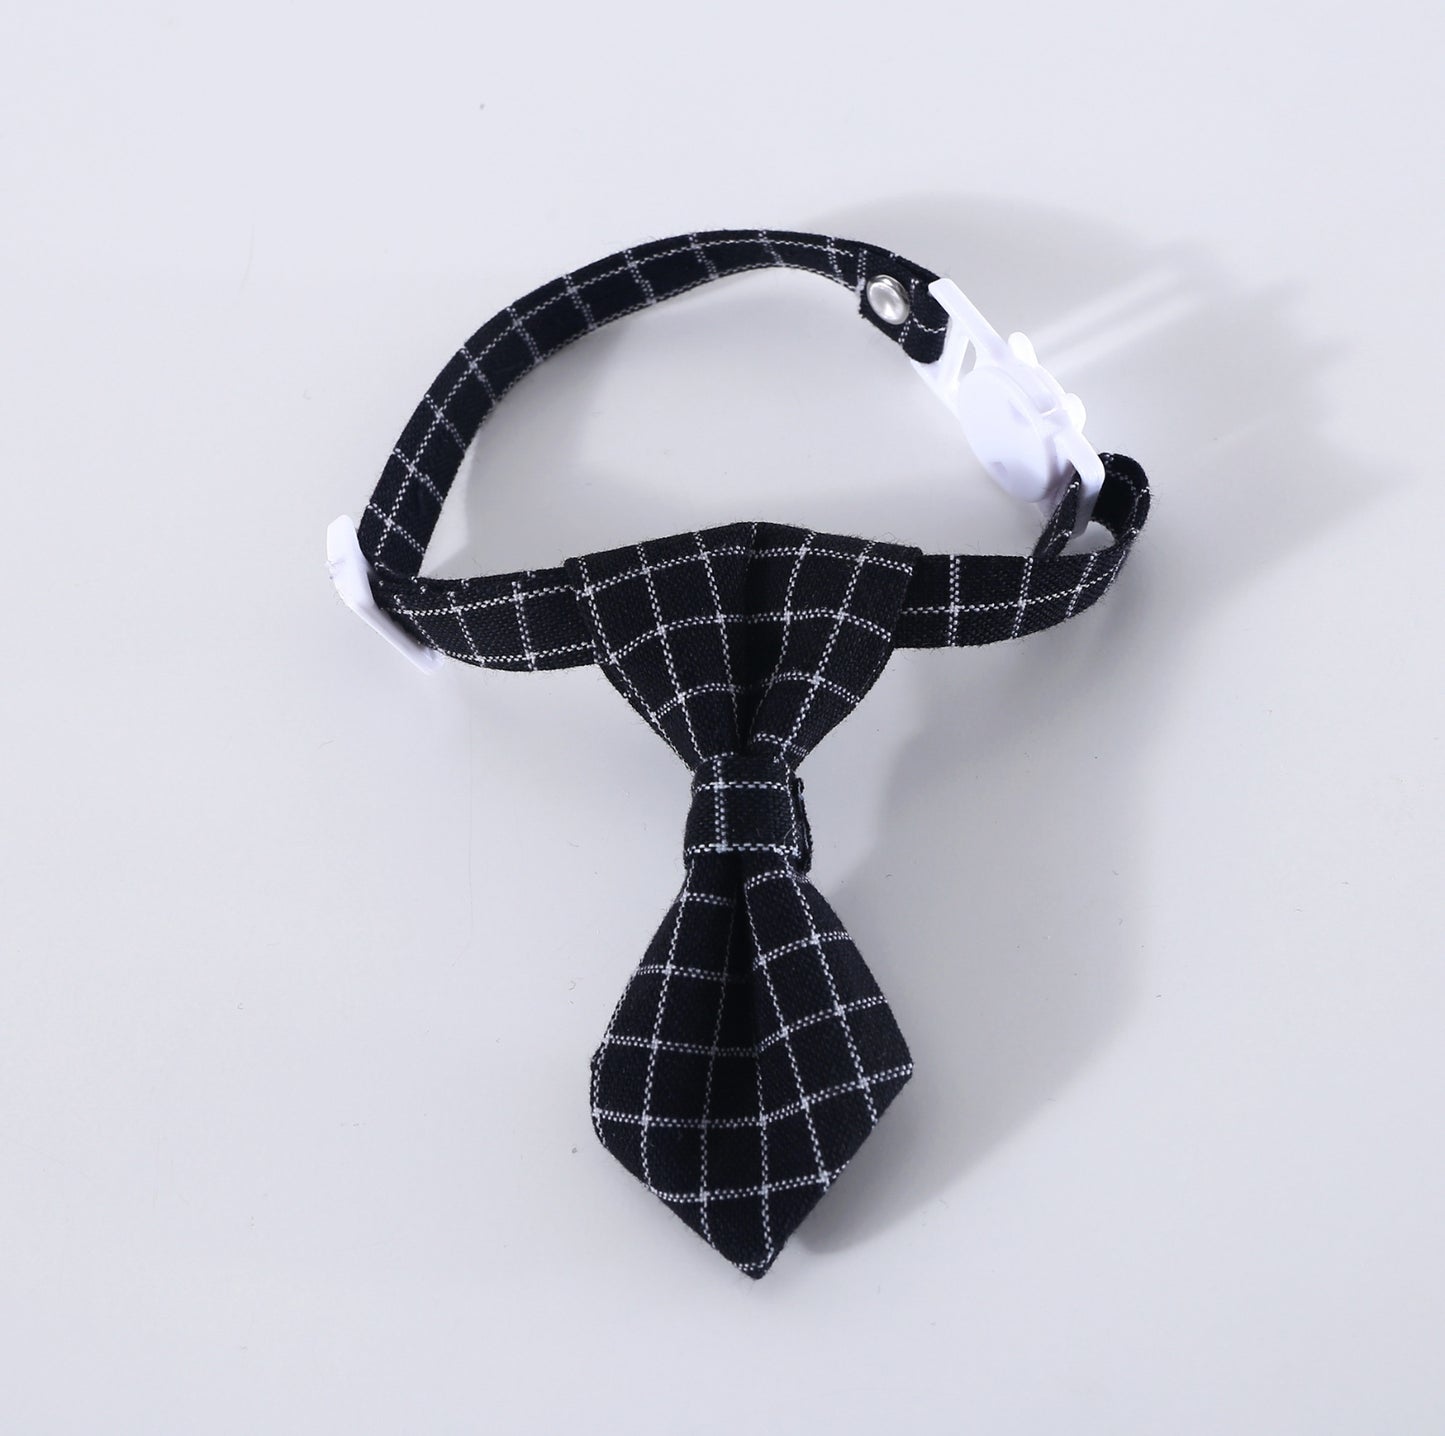 Pet Adjustable Bow/Tie Collar with Plaid Pattern